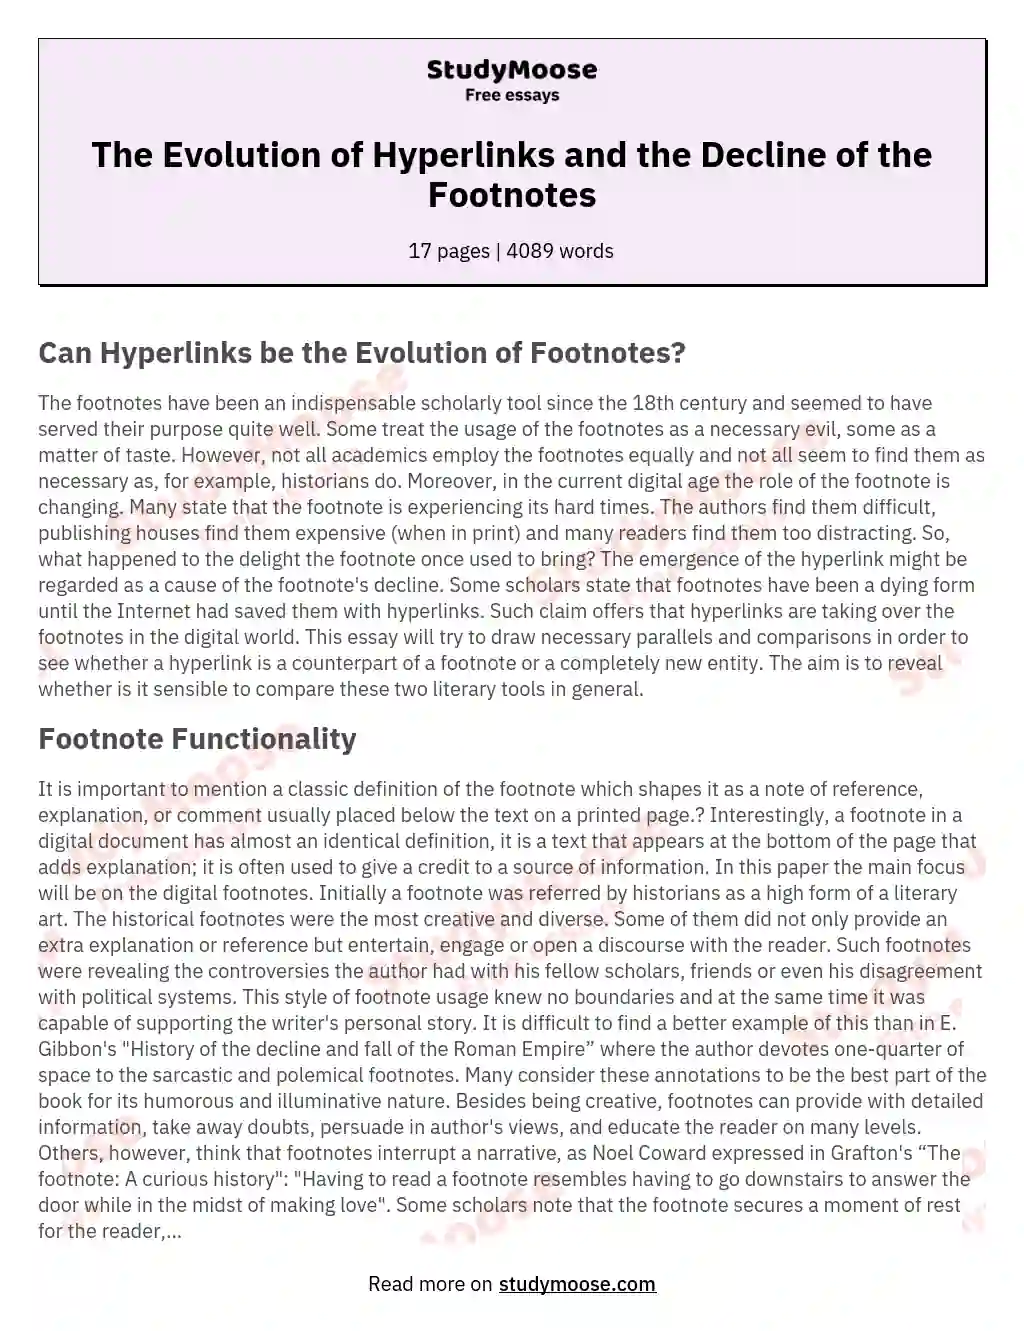 The Evolution of Hyperlinks and the Decline of the Footnotes essay